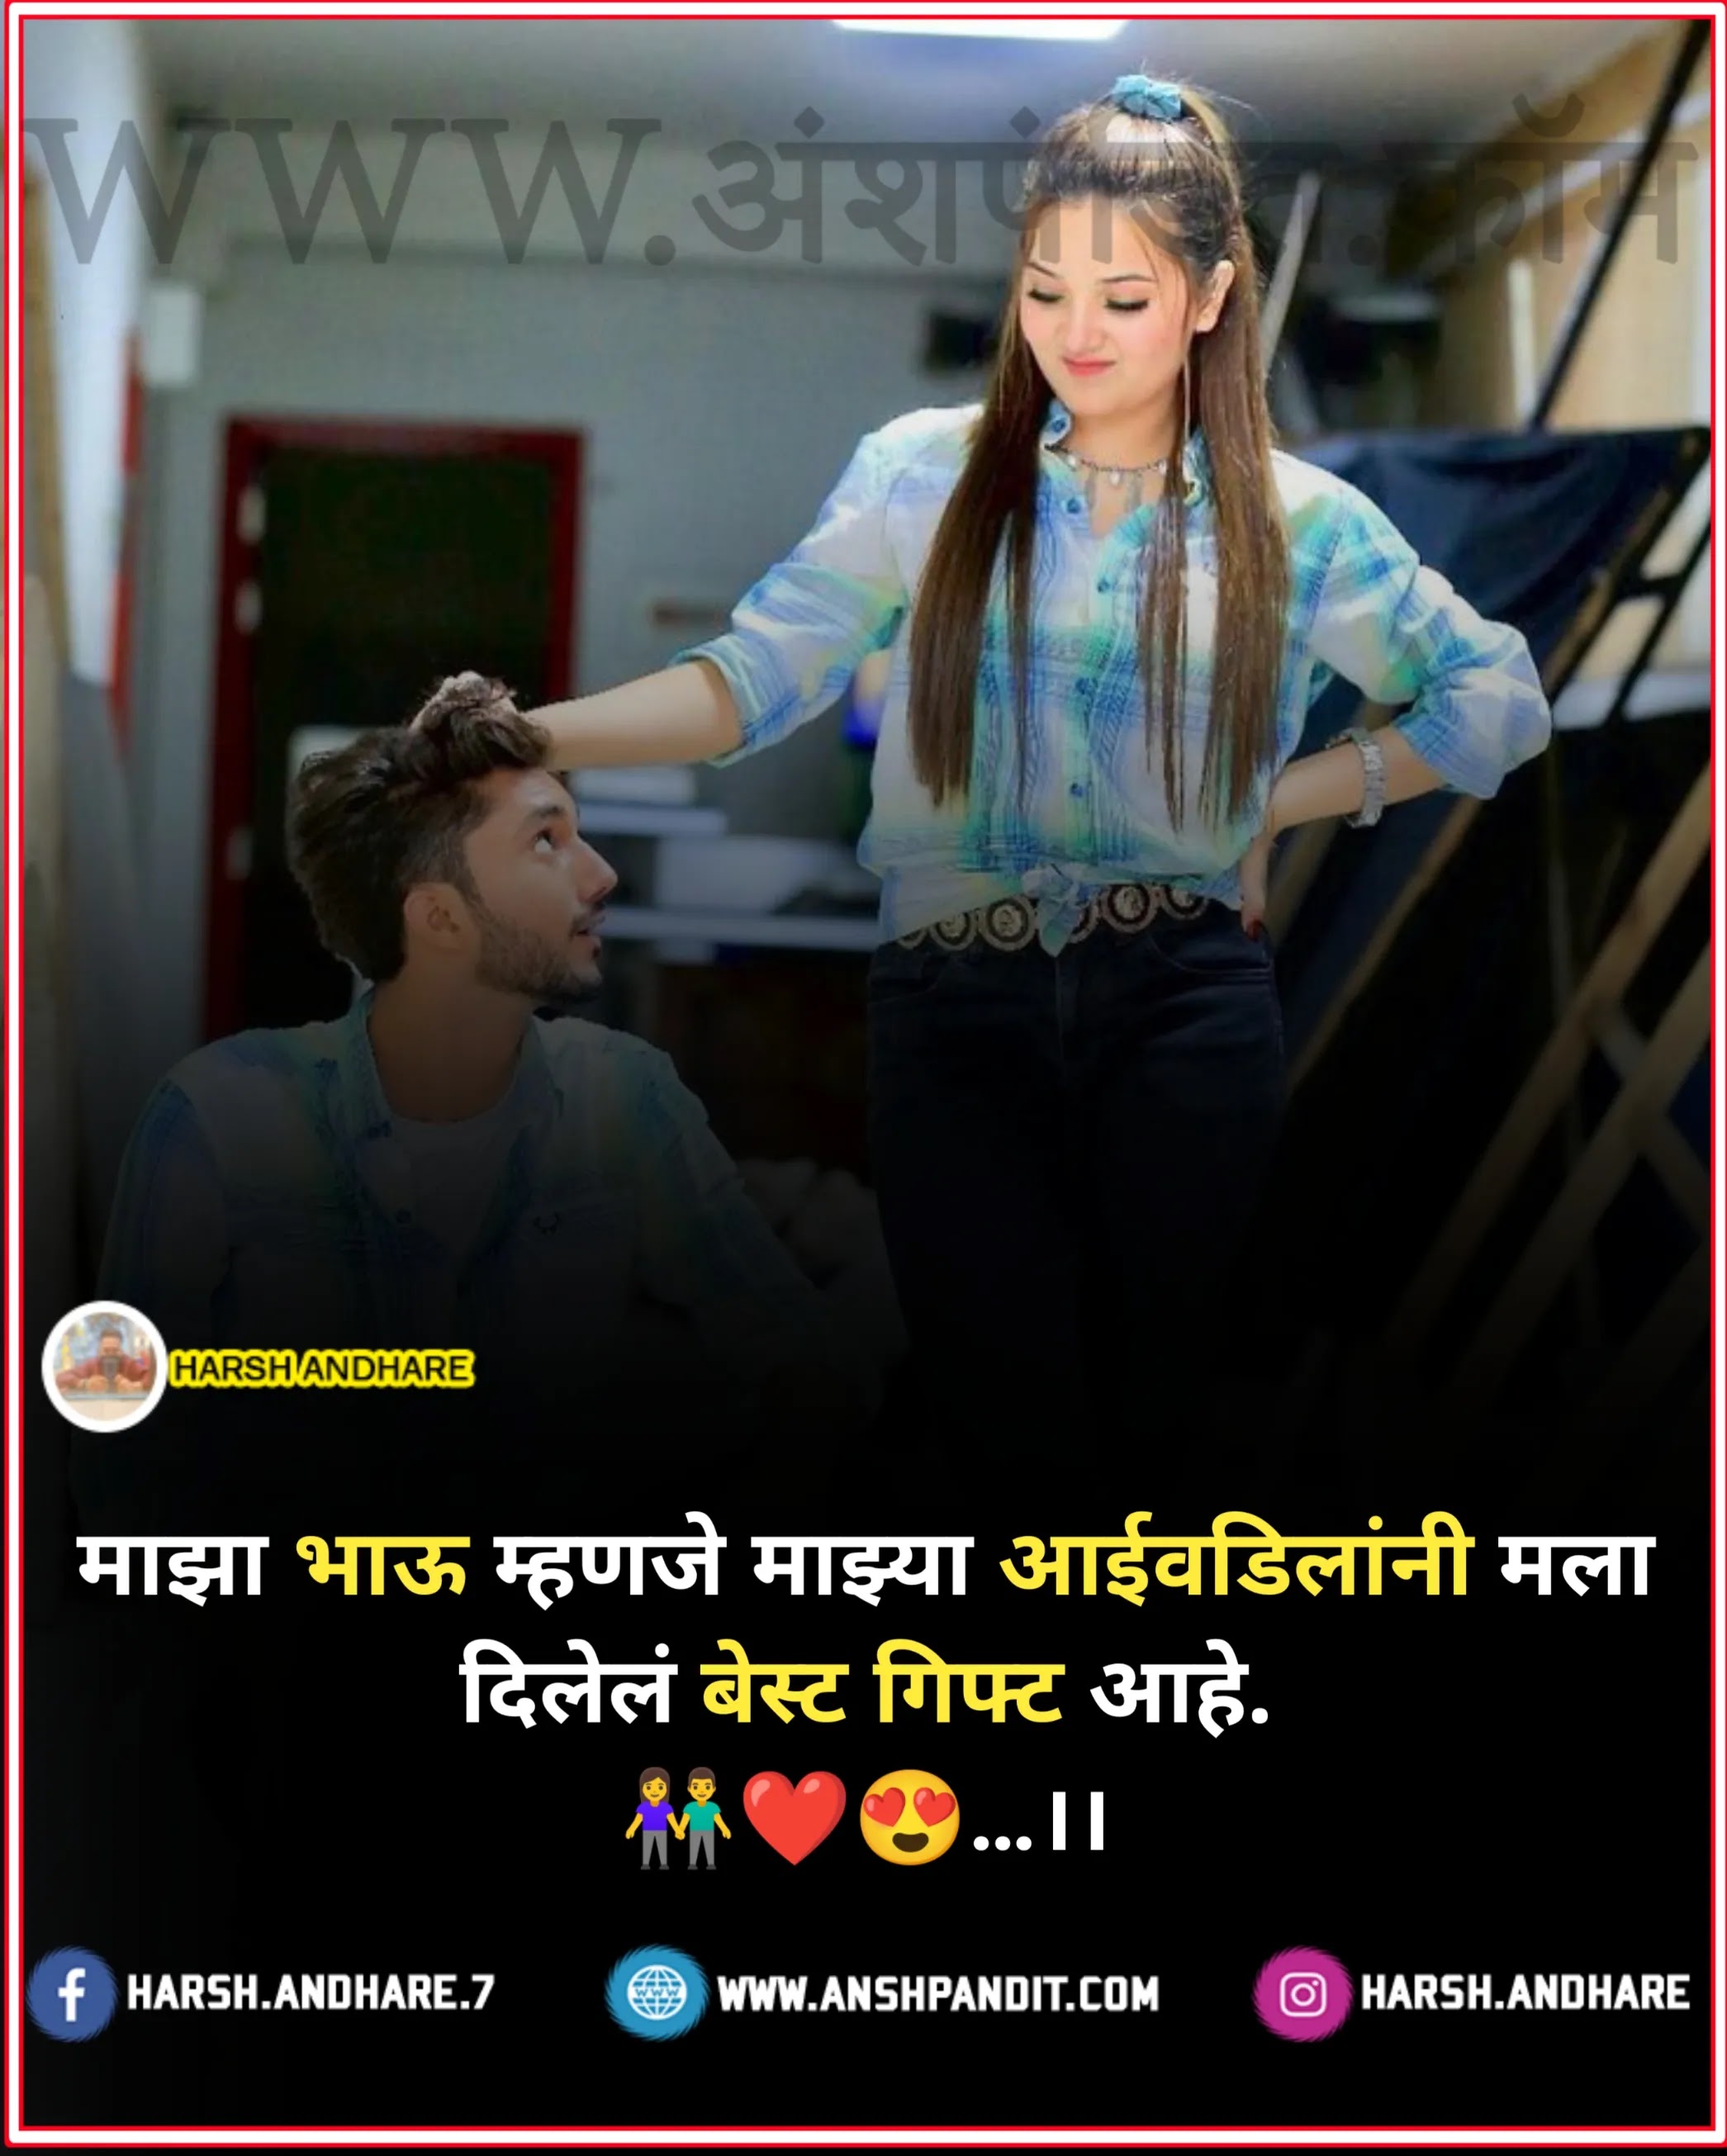 Brother Quotes in Marathi